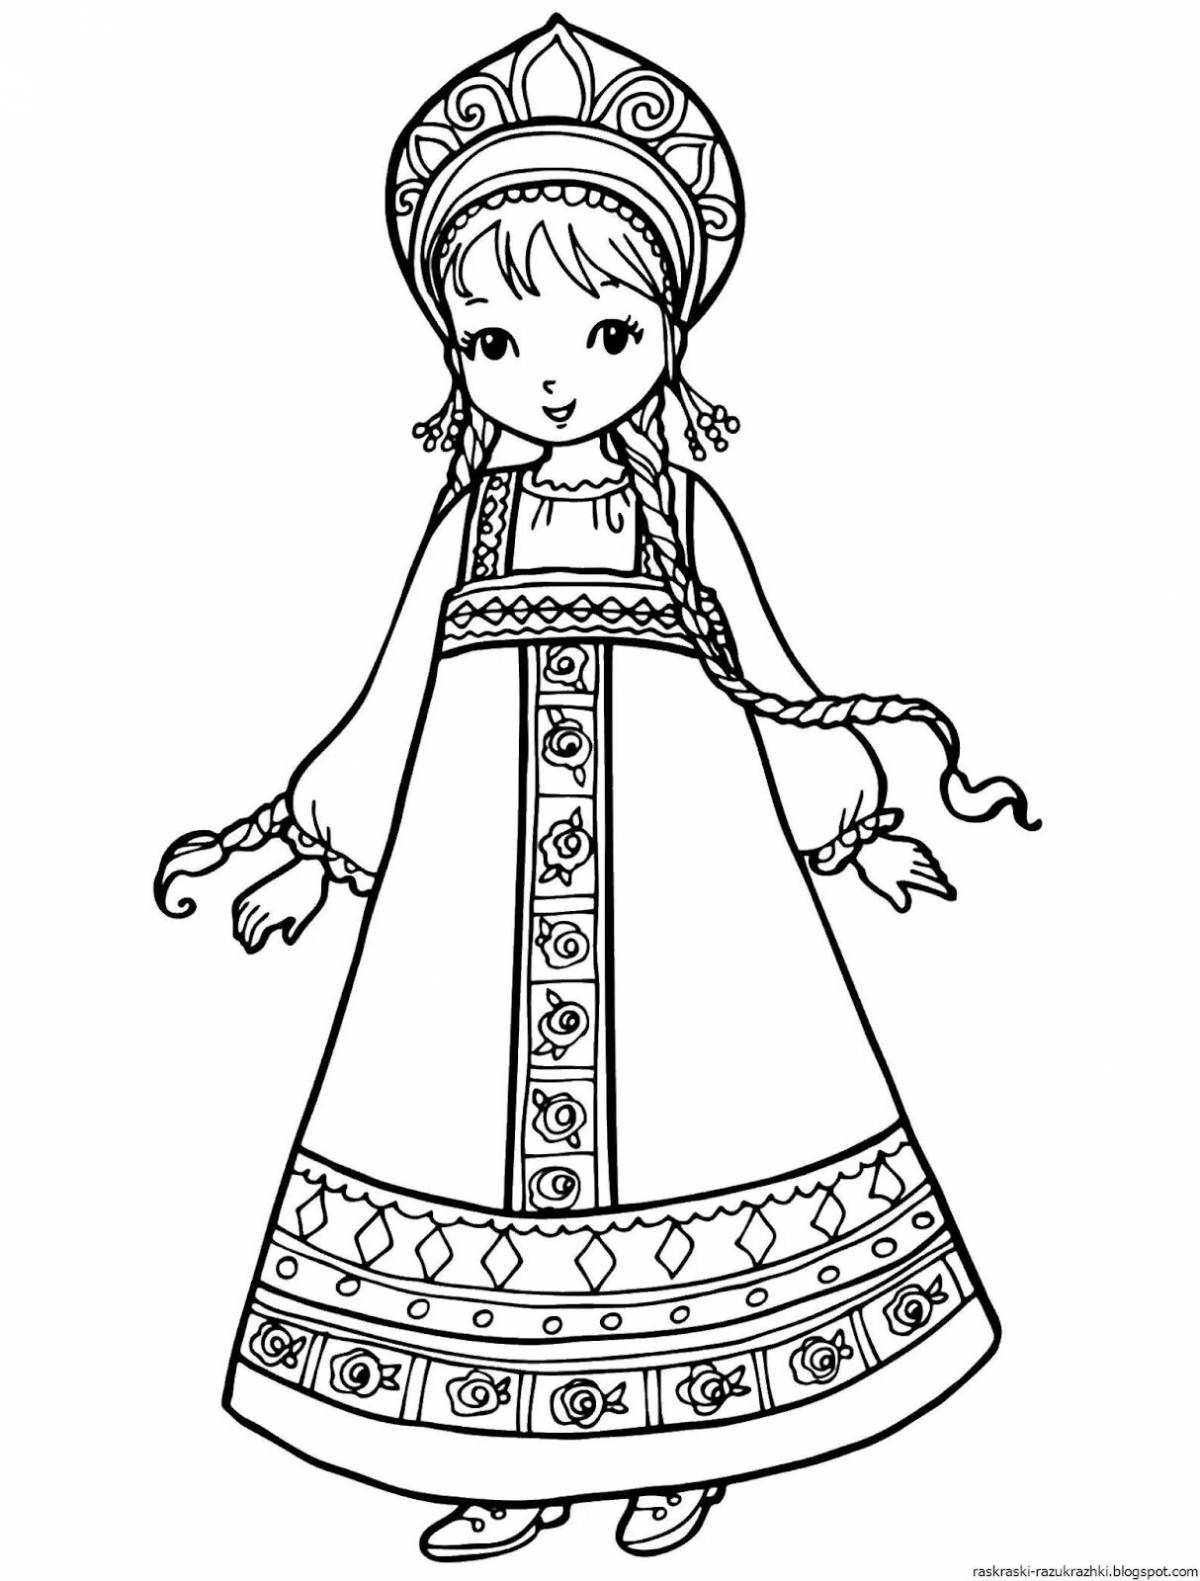 Charming Russian sundress coloring book